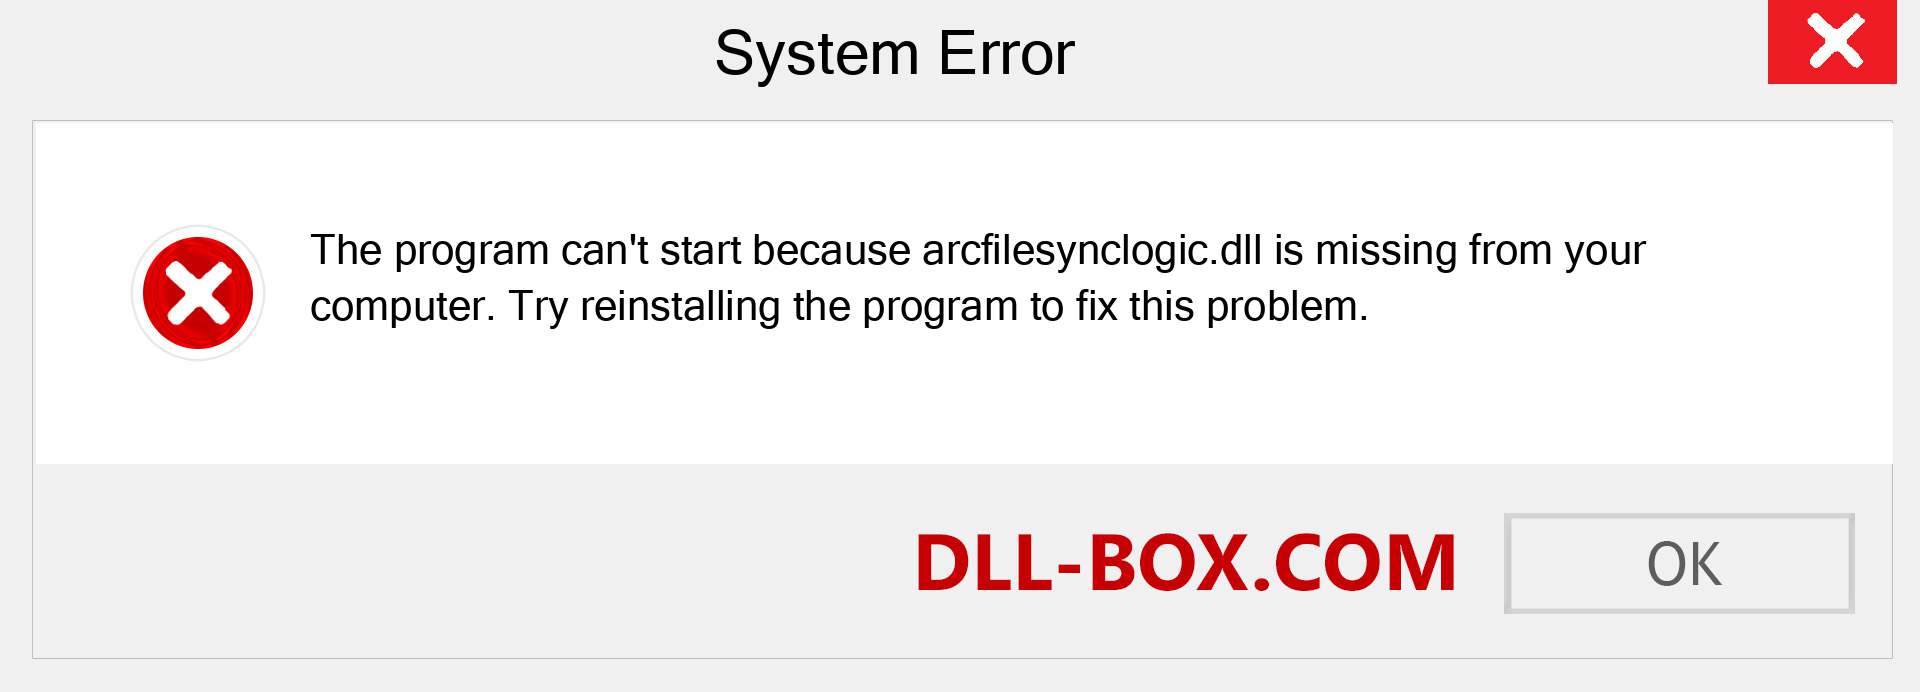  arcfilesynclogic.dll file is missing?. Download for Windows 7, 8, 10 - Fix  arcfilesynclogic dll Missing Error on Windows, photos, images